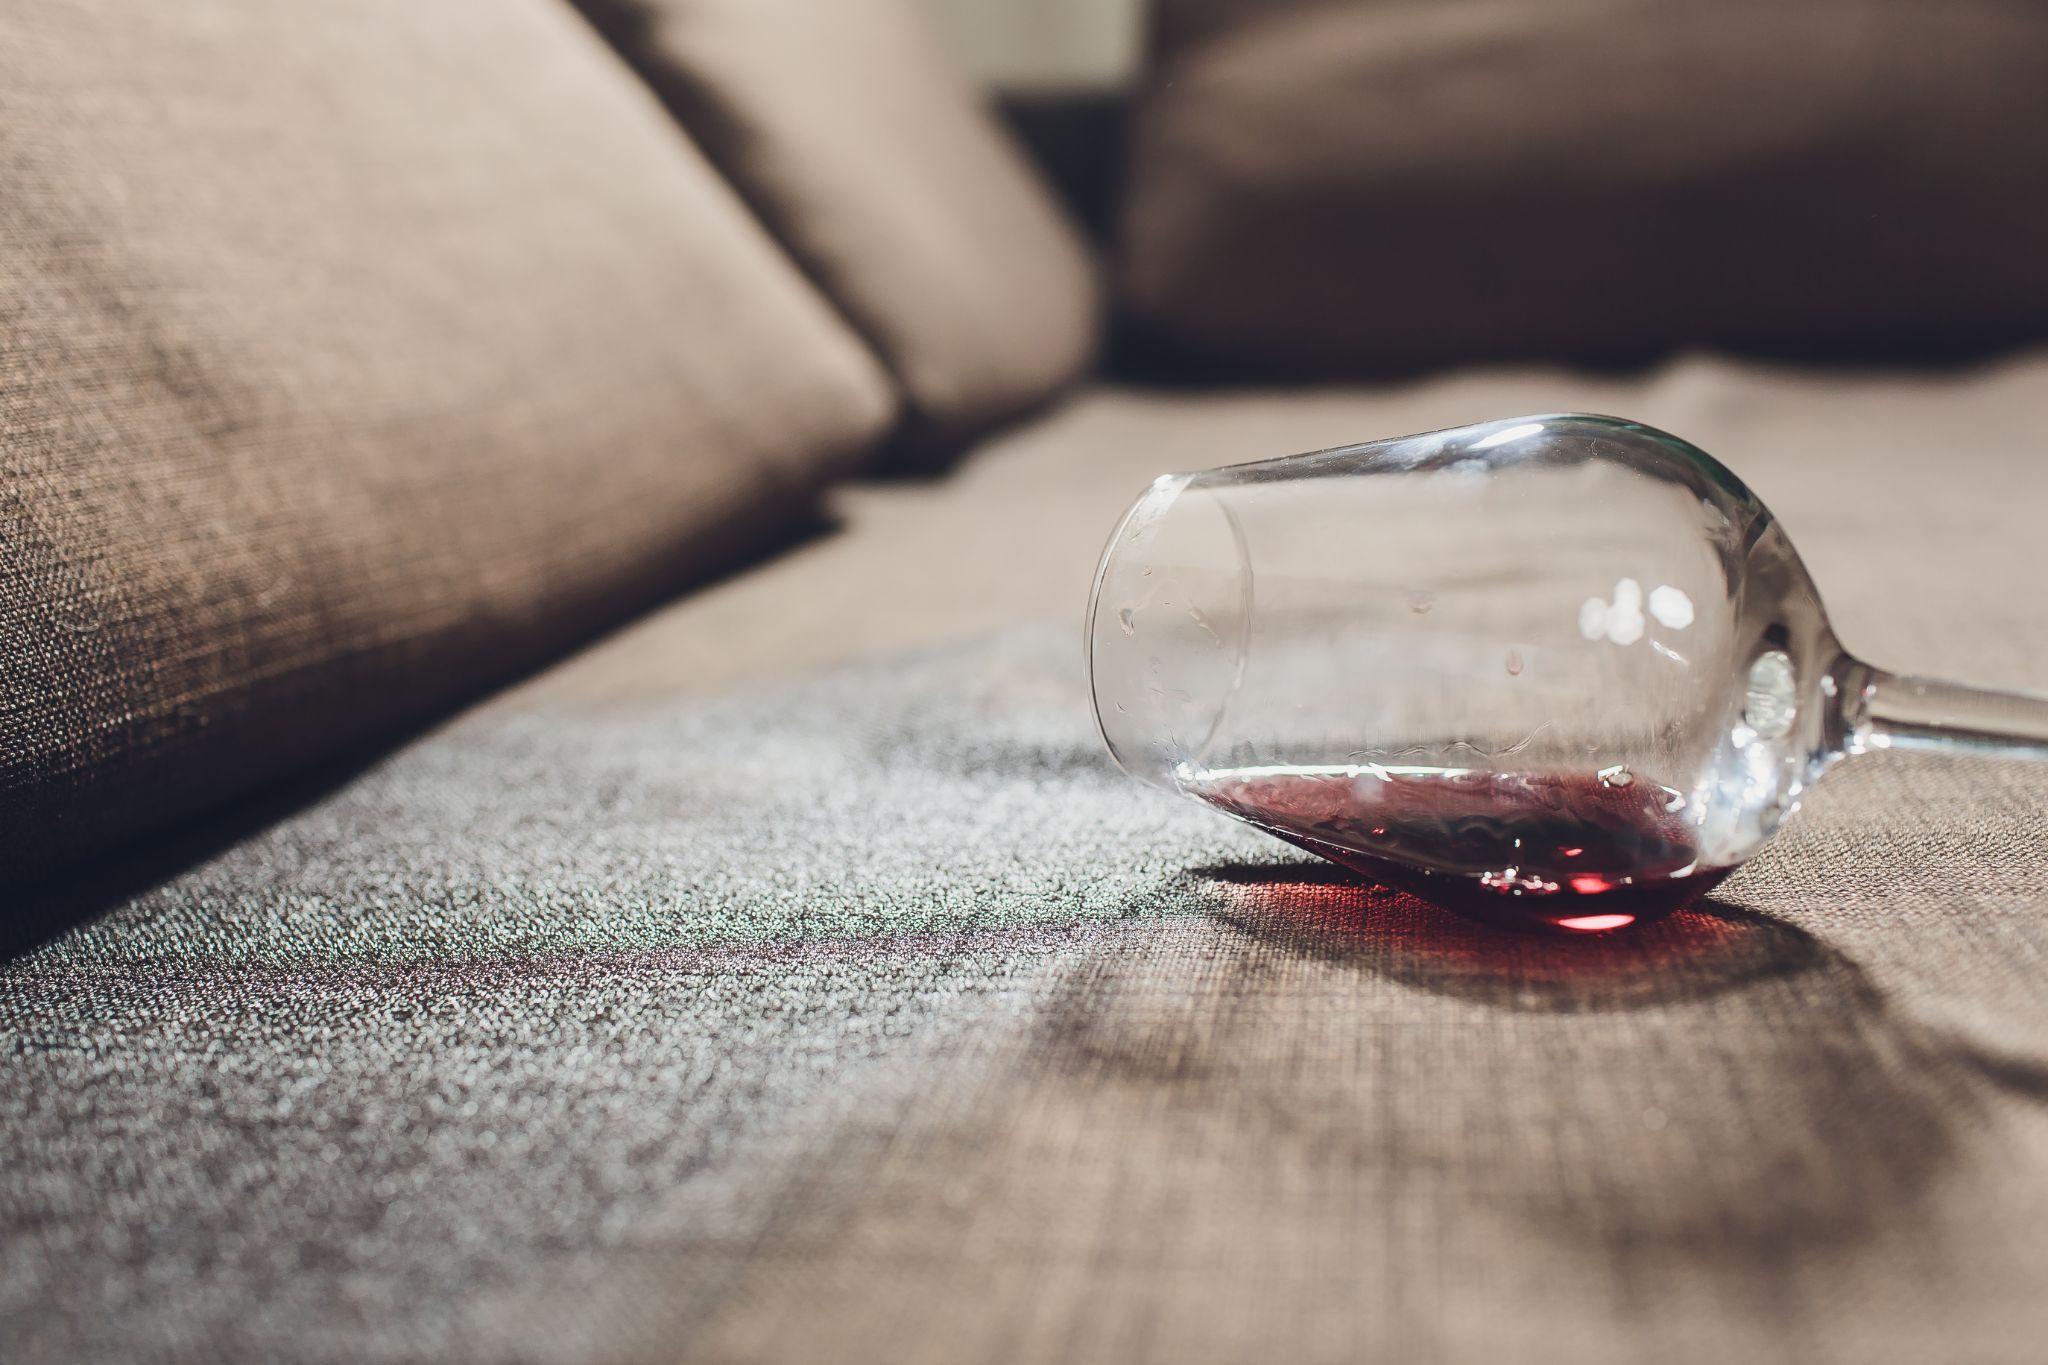 Red wine spilled on a grey couch sofa